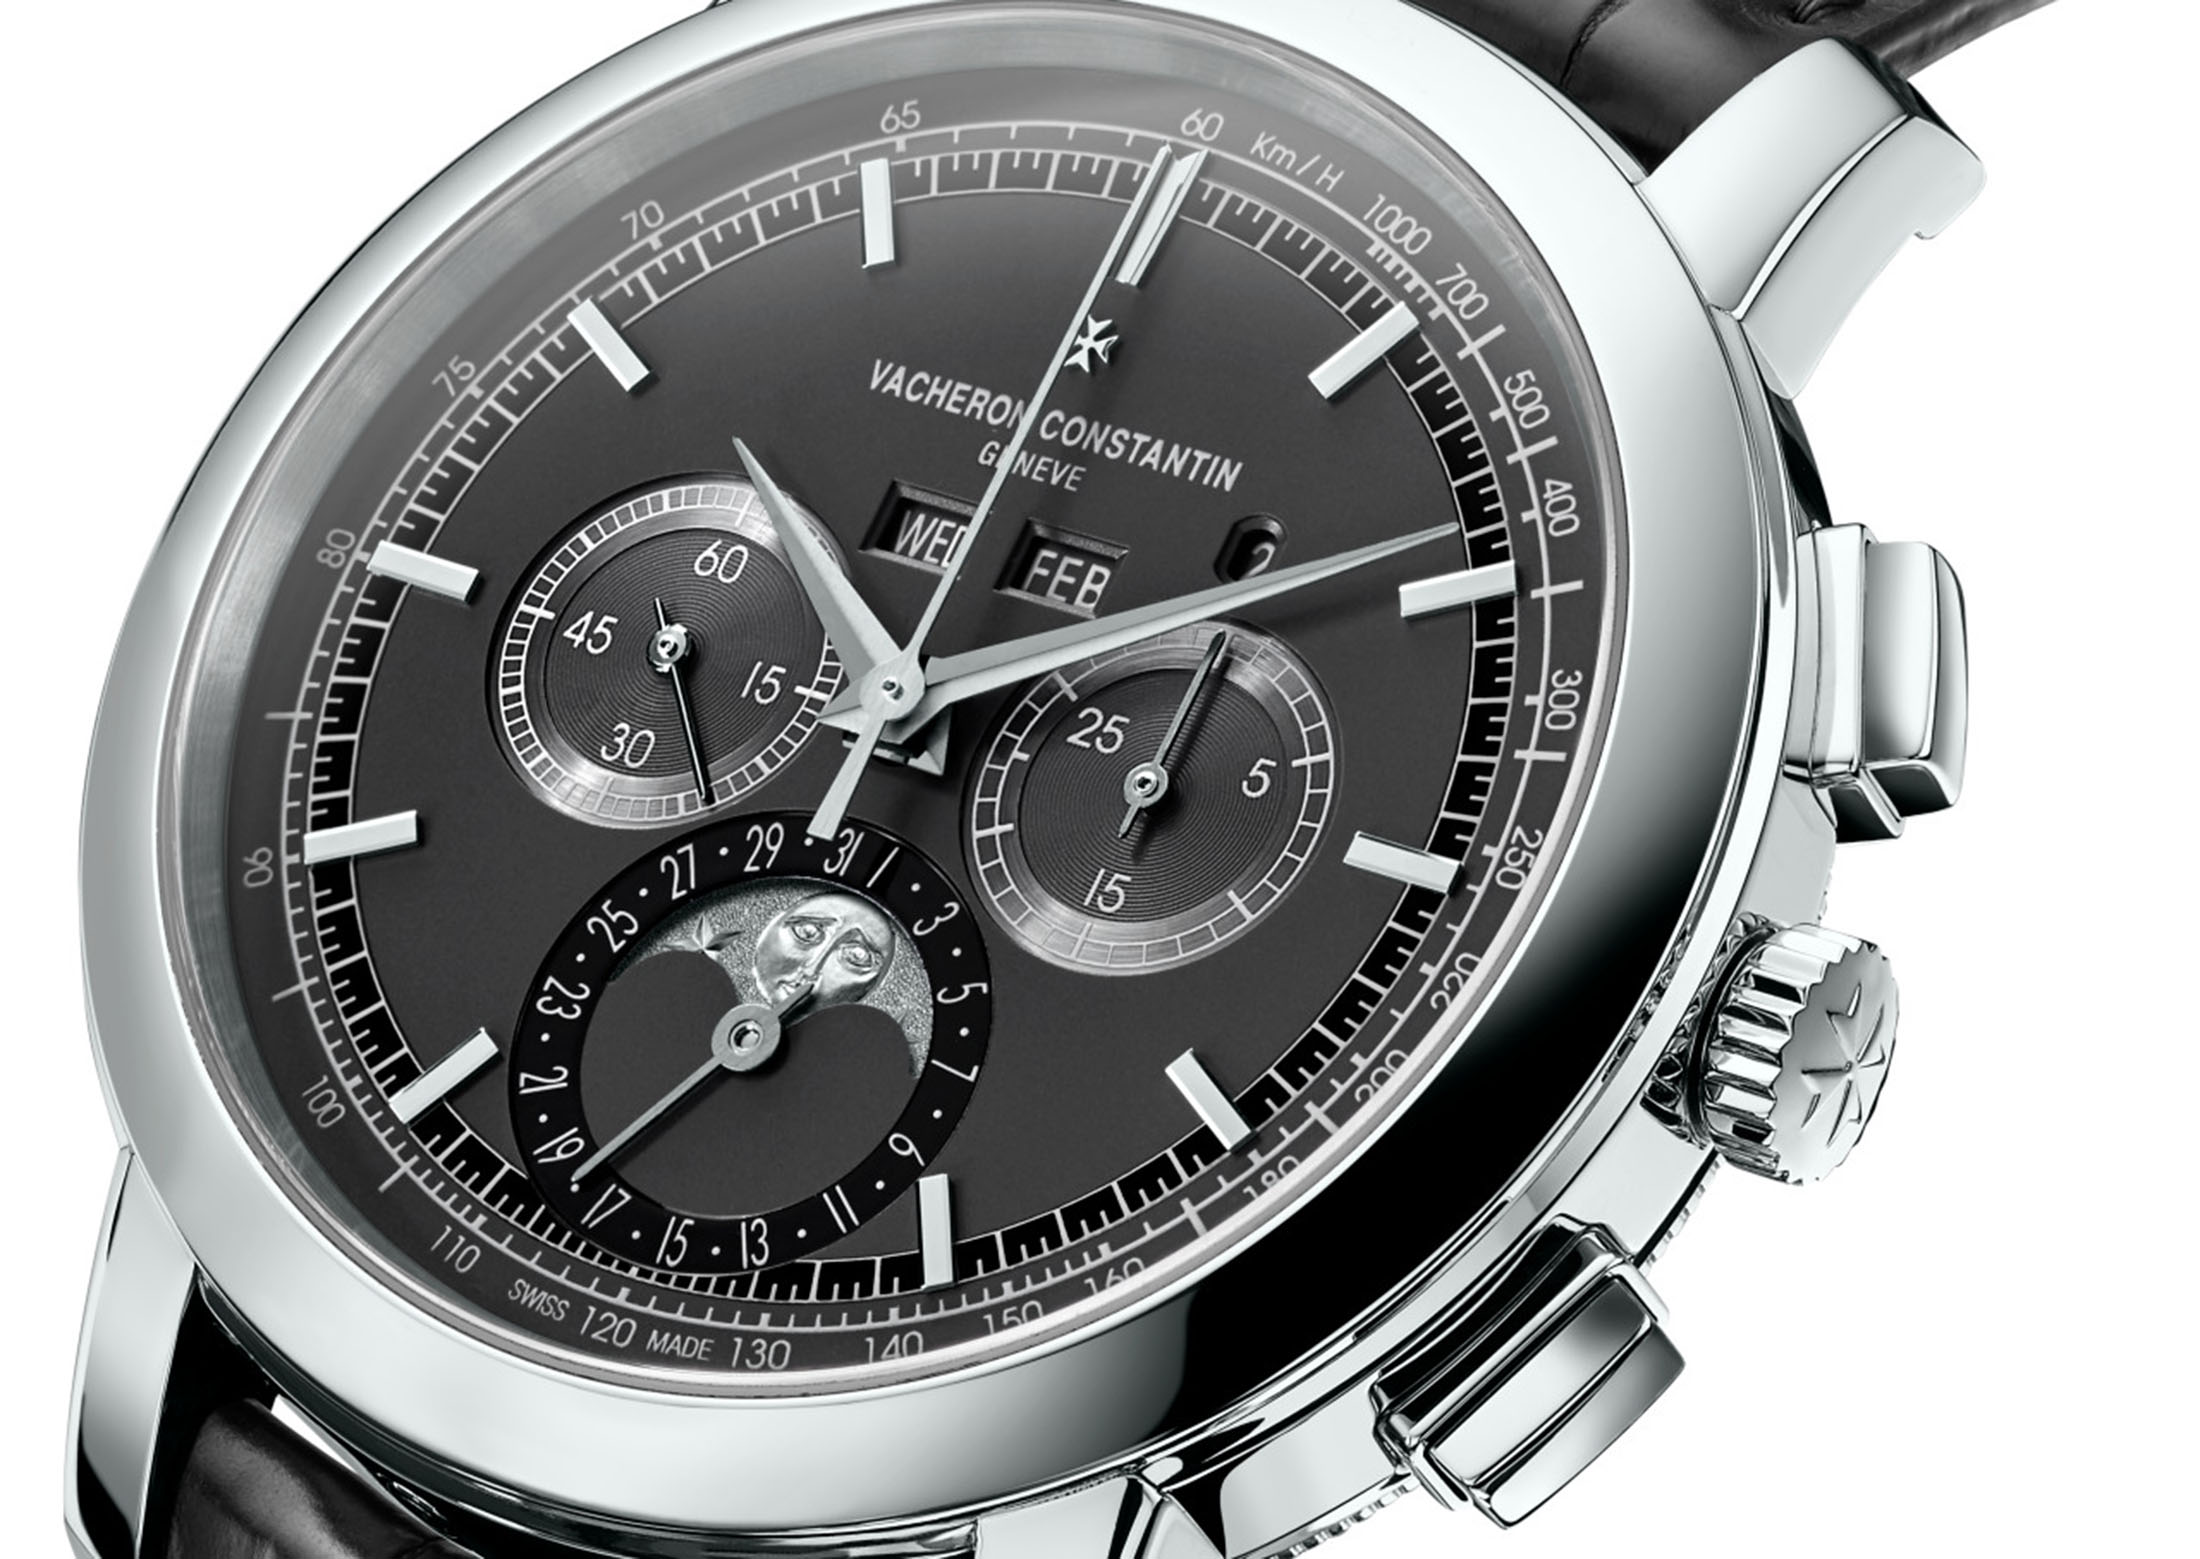 The New $150,000 Platinum Watch Is a Big Step for The Vacheron Constantin